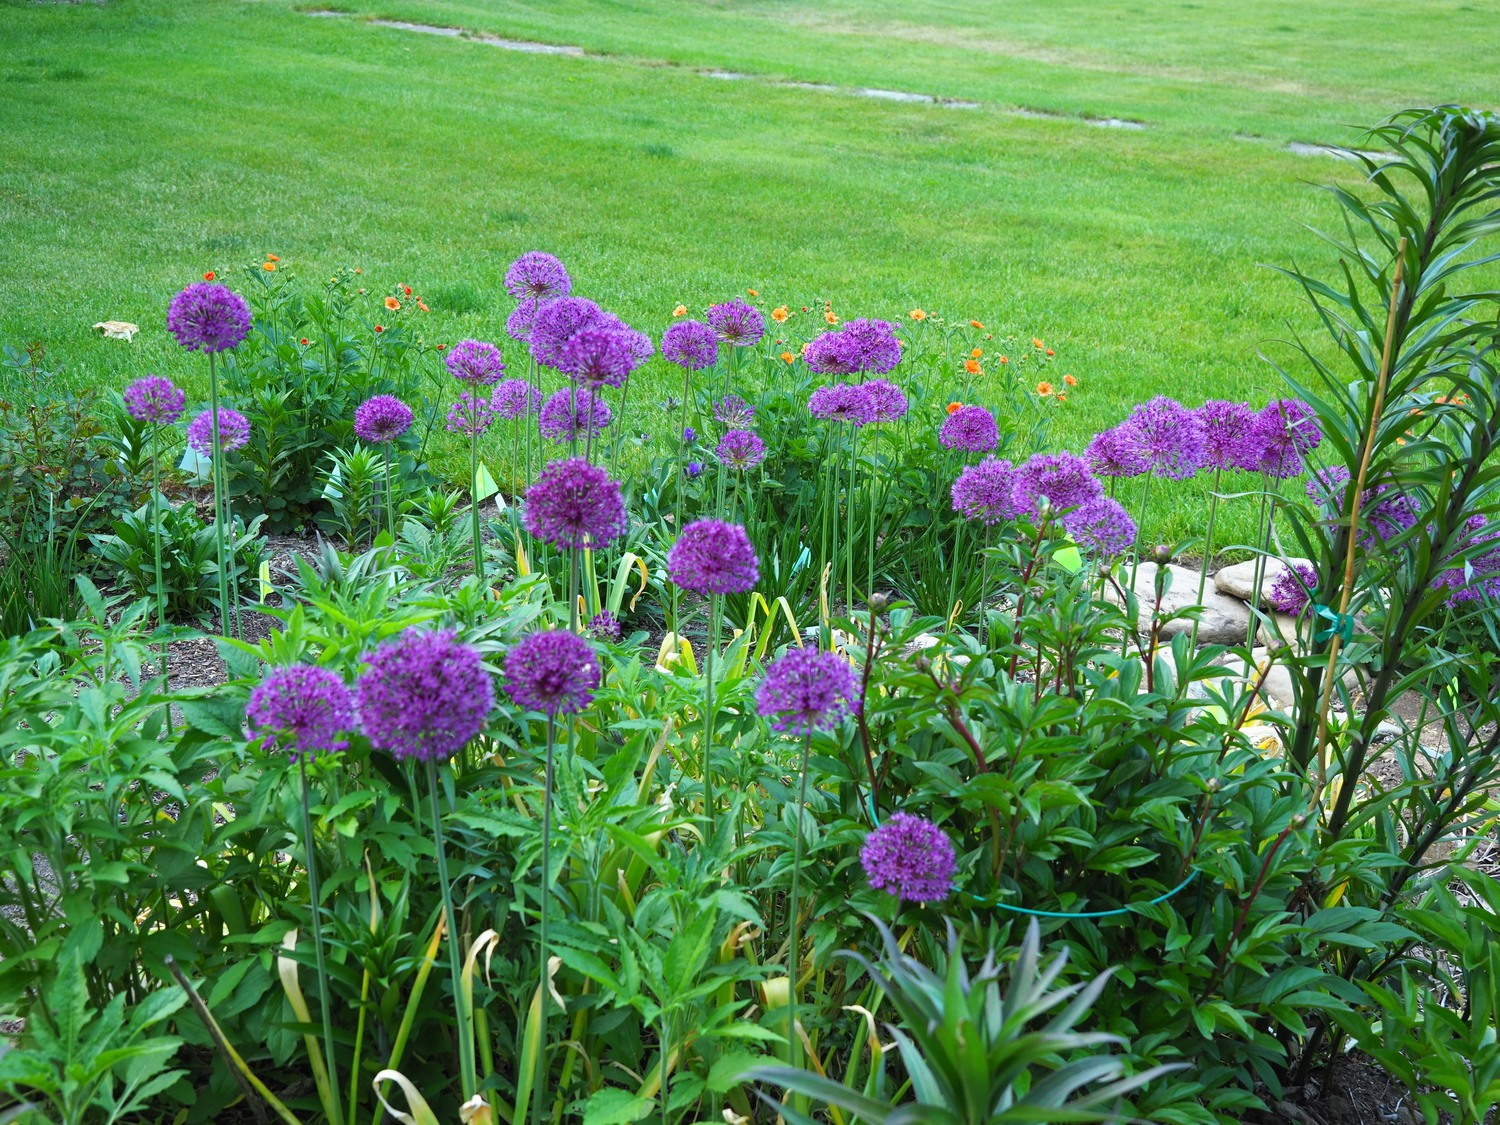 Alliums, or ornamental onions, bloom mid-spring and into the summer depending on the variety.  They don’t grow from crowns and they have hollow stems but we still treat them as perennials and use them in perennial gardens.  Varieties like Globemaster can be quite stunning and make great cuts.
ANDREW MESSINGER